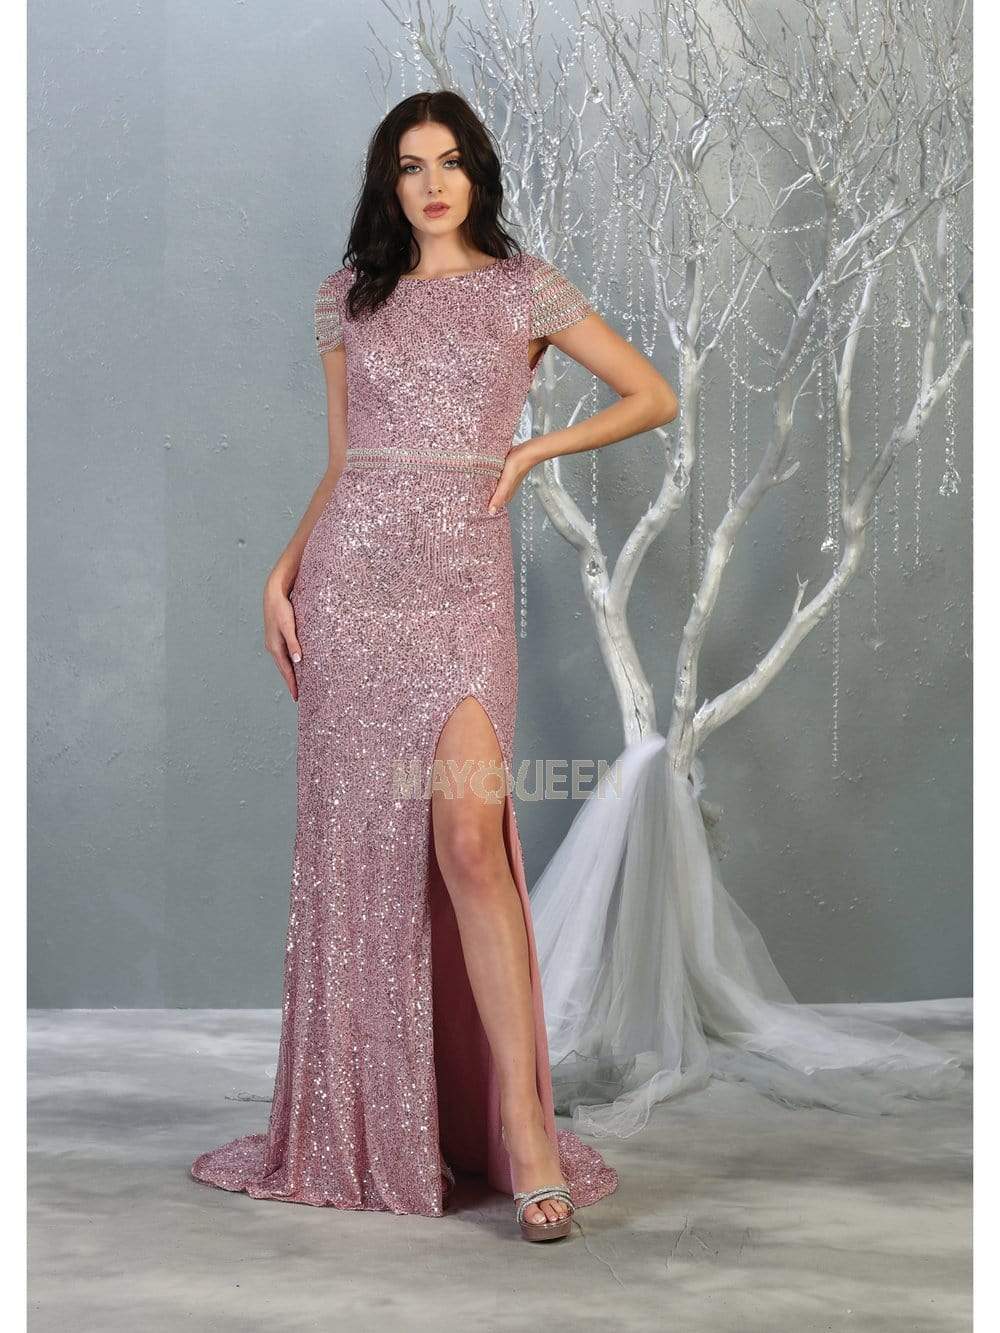 May Queen - RQ7848 Bateau Evening Gown with Slit
